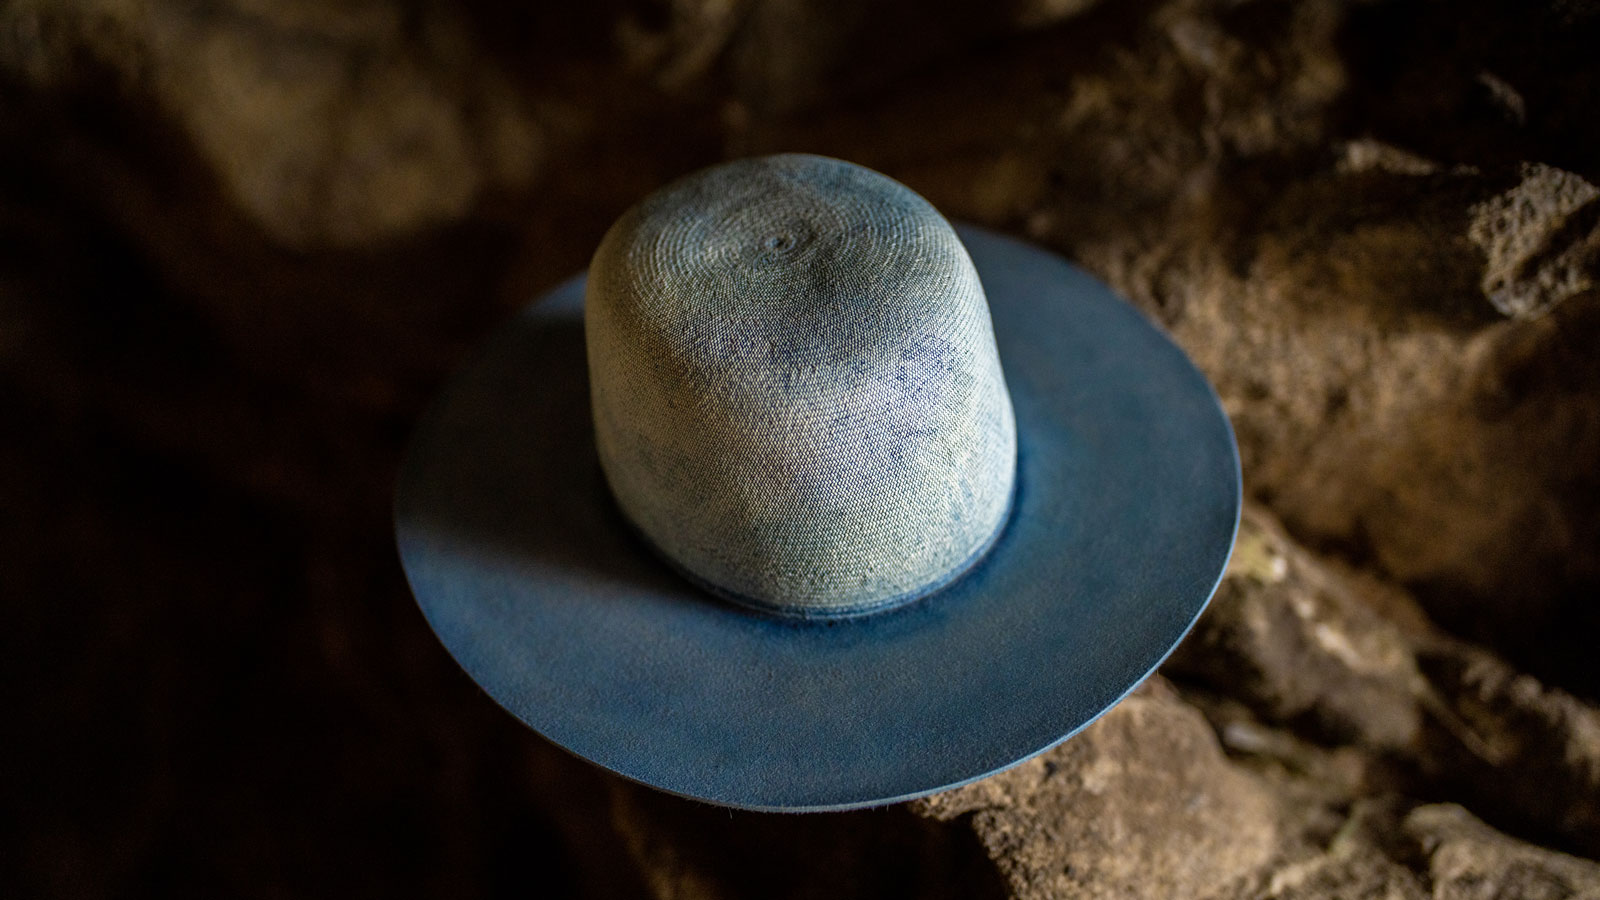 Design
A double-dipped MONTECRISTI handwoven straw crown with a unique gradation of powder blue indigo. A 4 brim beaver indigo washed indigo hand-dyed. The finest of both Worlds.
Material
A double-dipped MONTECRISTI handwoven straw and 100% Western Beaver Fur Felt indigo-washed brim sustainably acquired. All our hats are exquisitely handmade, therefore they are unique and not identical. Please allow a variation in the color combination.
Specifications
4 semi-tear drop double-dipped Montecristi crown with navy detailed stitching. A 4 beaver brim which has been indigo-washed and indigo hand-dyed.Please allow 4-6 weeks to custom make this special piece.